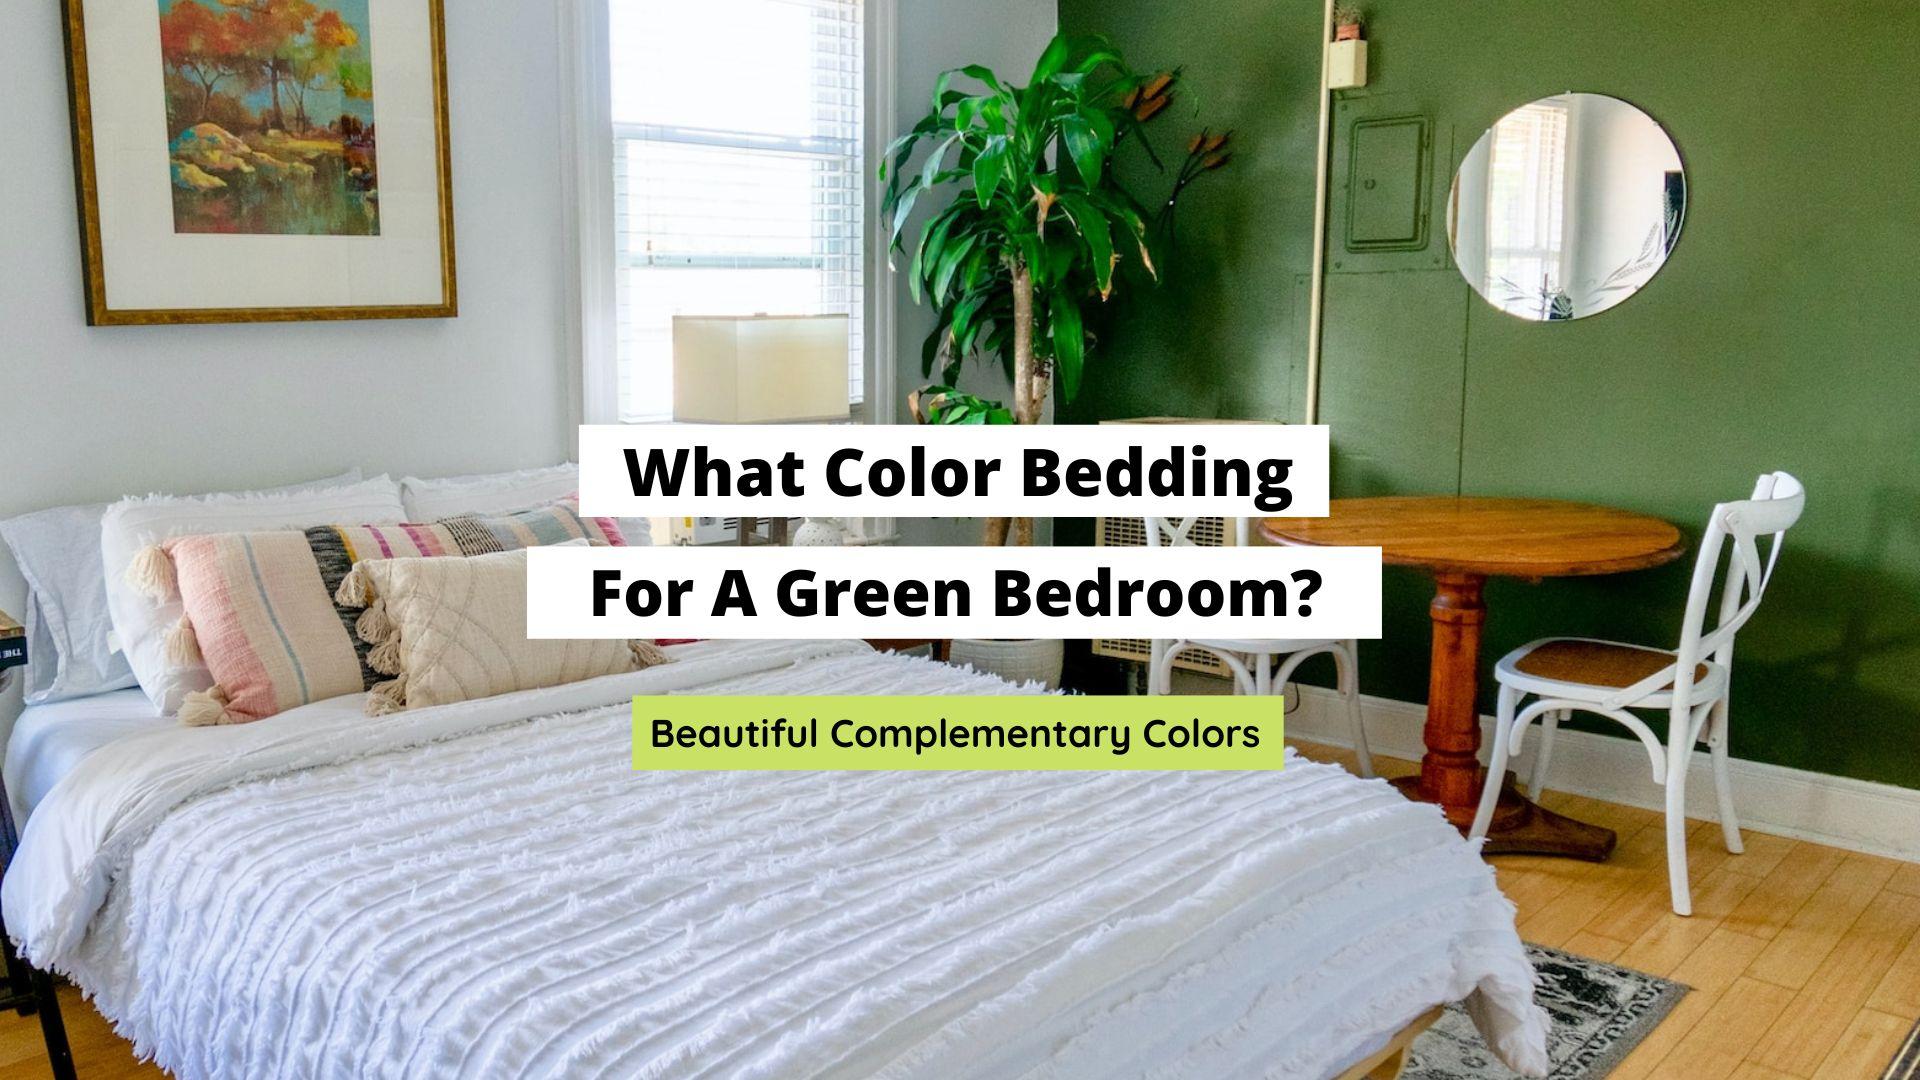 What Color Bedding For A Green Bedroom? (9 Colors) - Craftsonfire